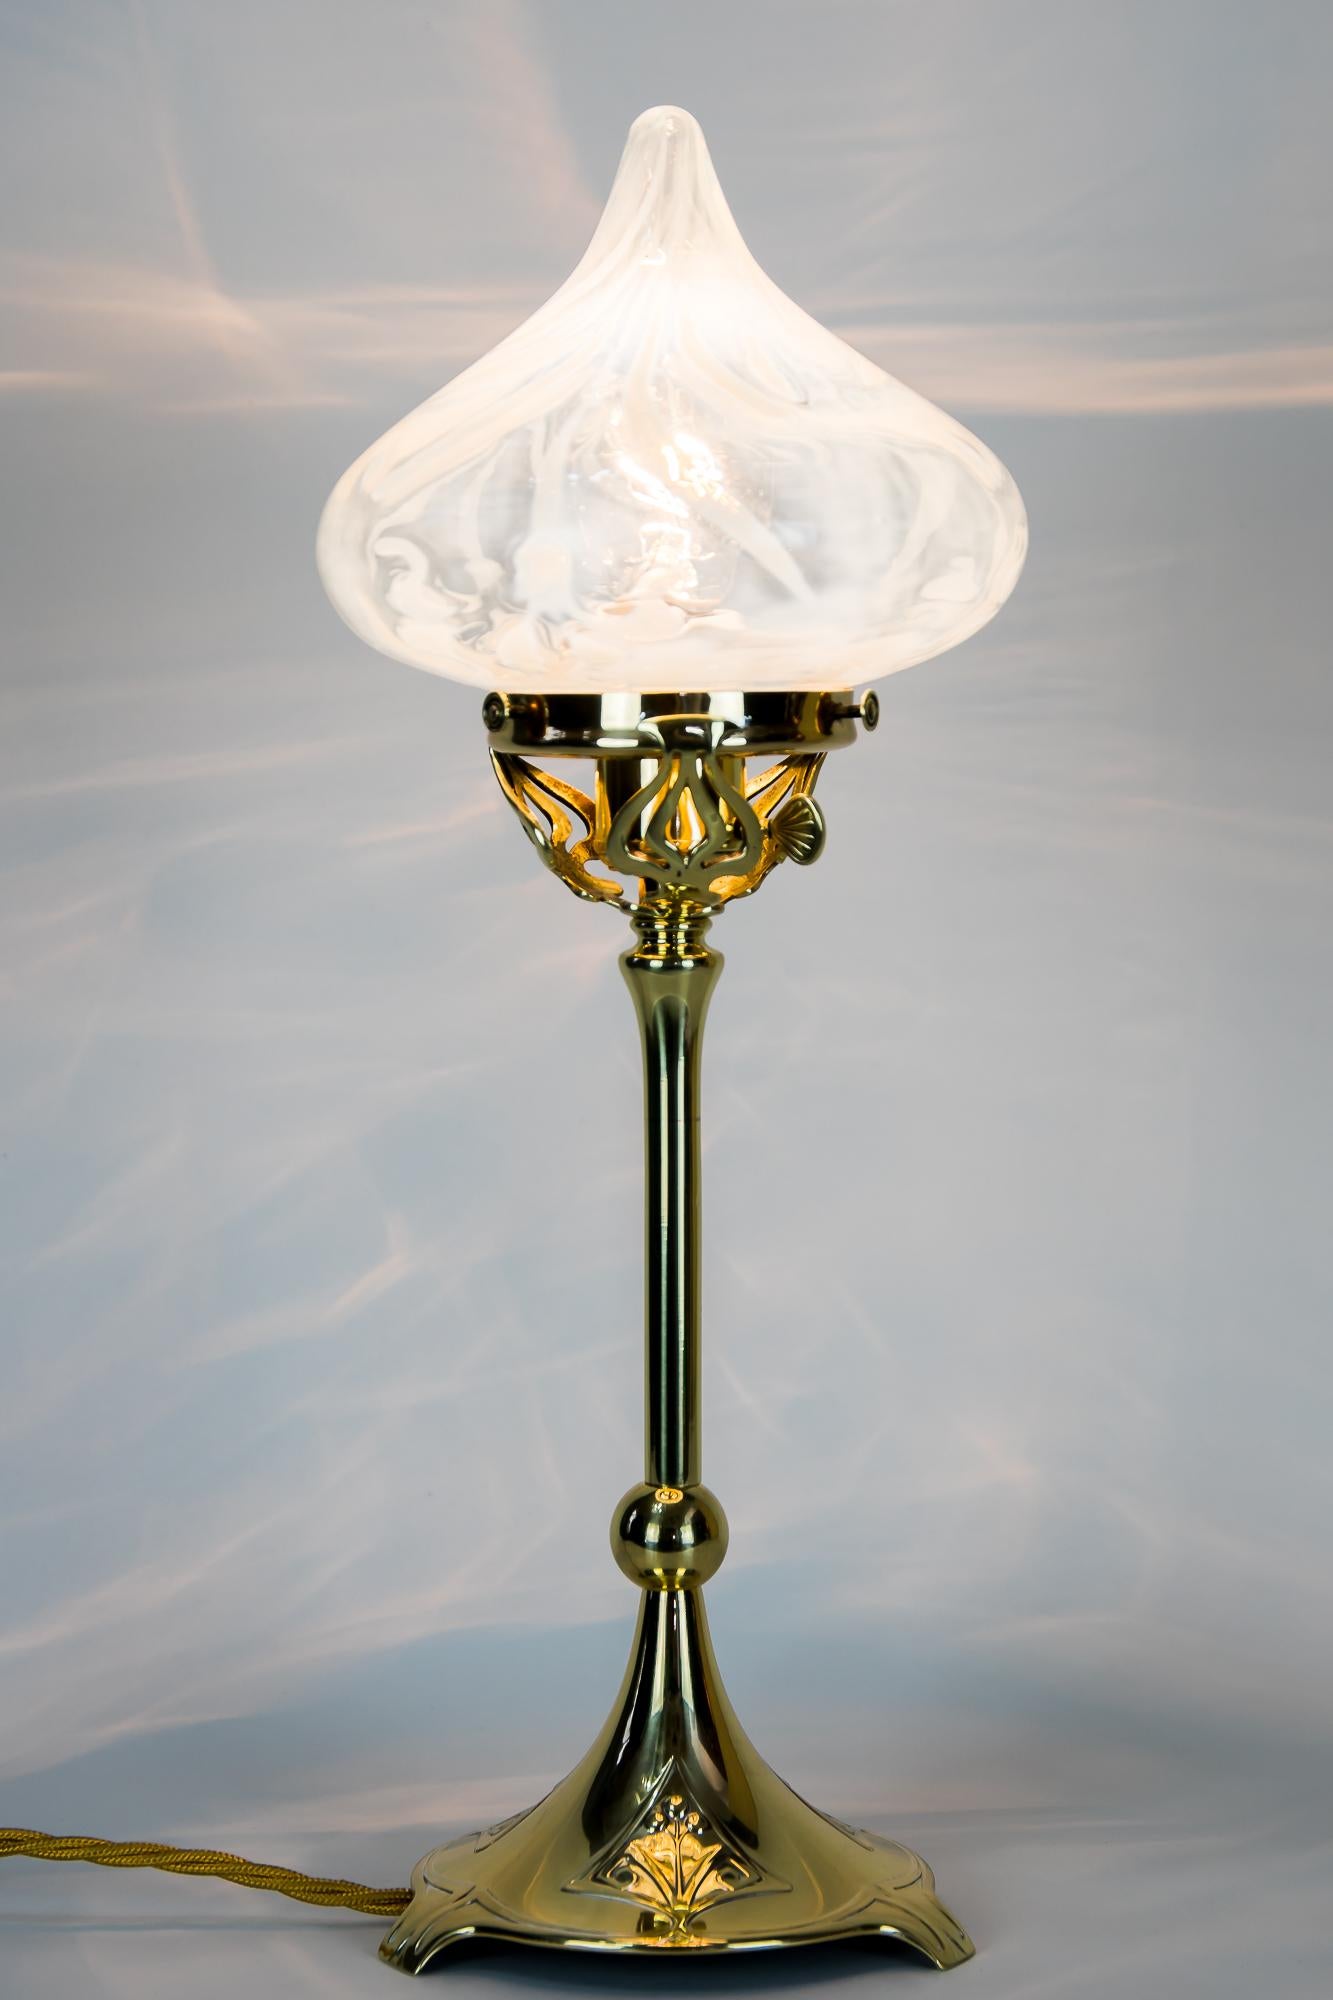 Early 20th Century Jugendstil Floral Lamp Vienna 1905s with Opaline Glass Shade For Sale